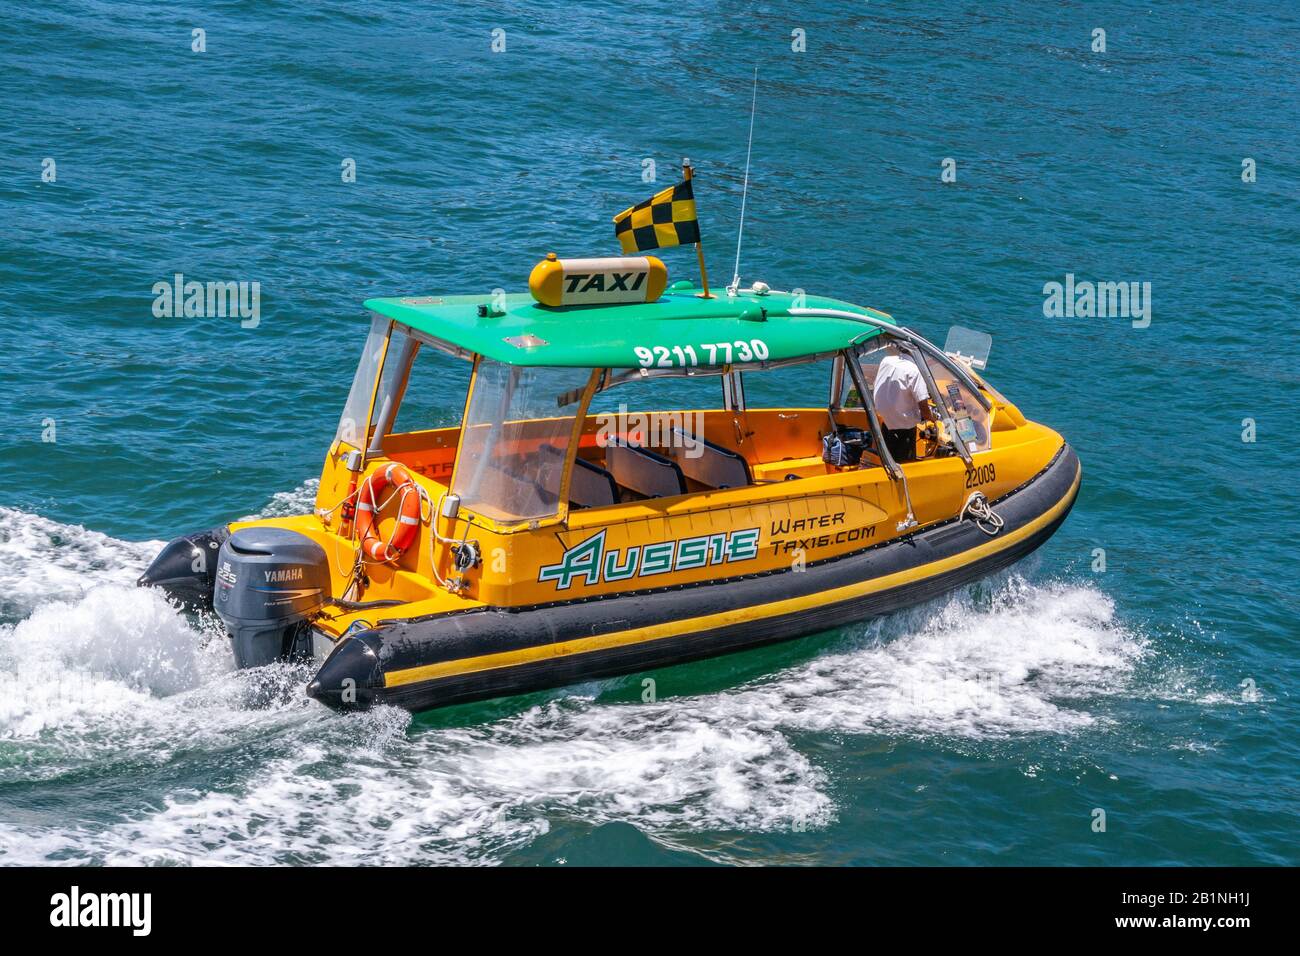 Sydney, Australia - December 11, 2009: Closeup of small deep-yellow and green water-taxi on blue bay water producing white surf behind. Stock Photo